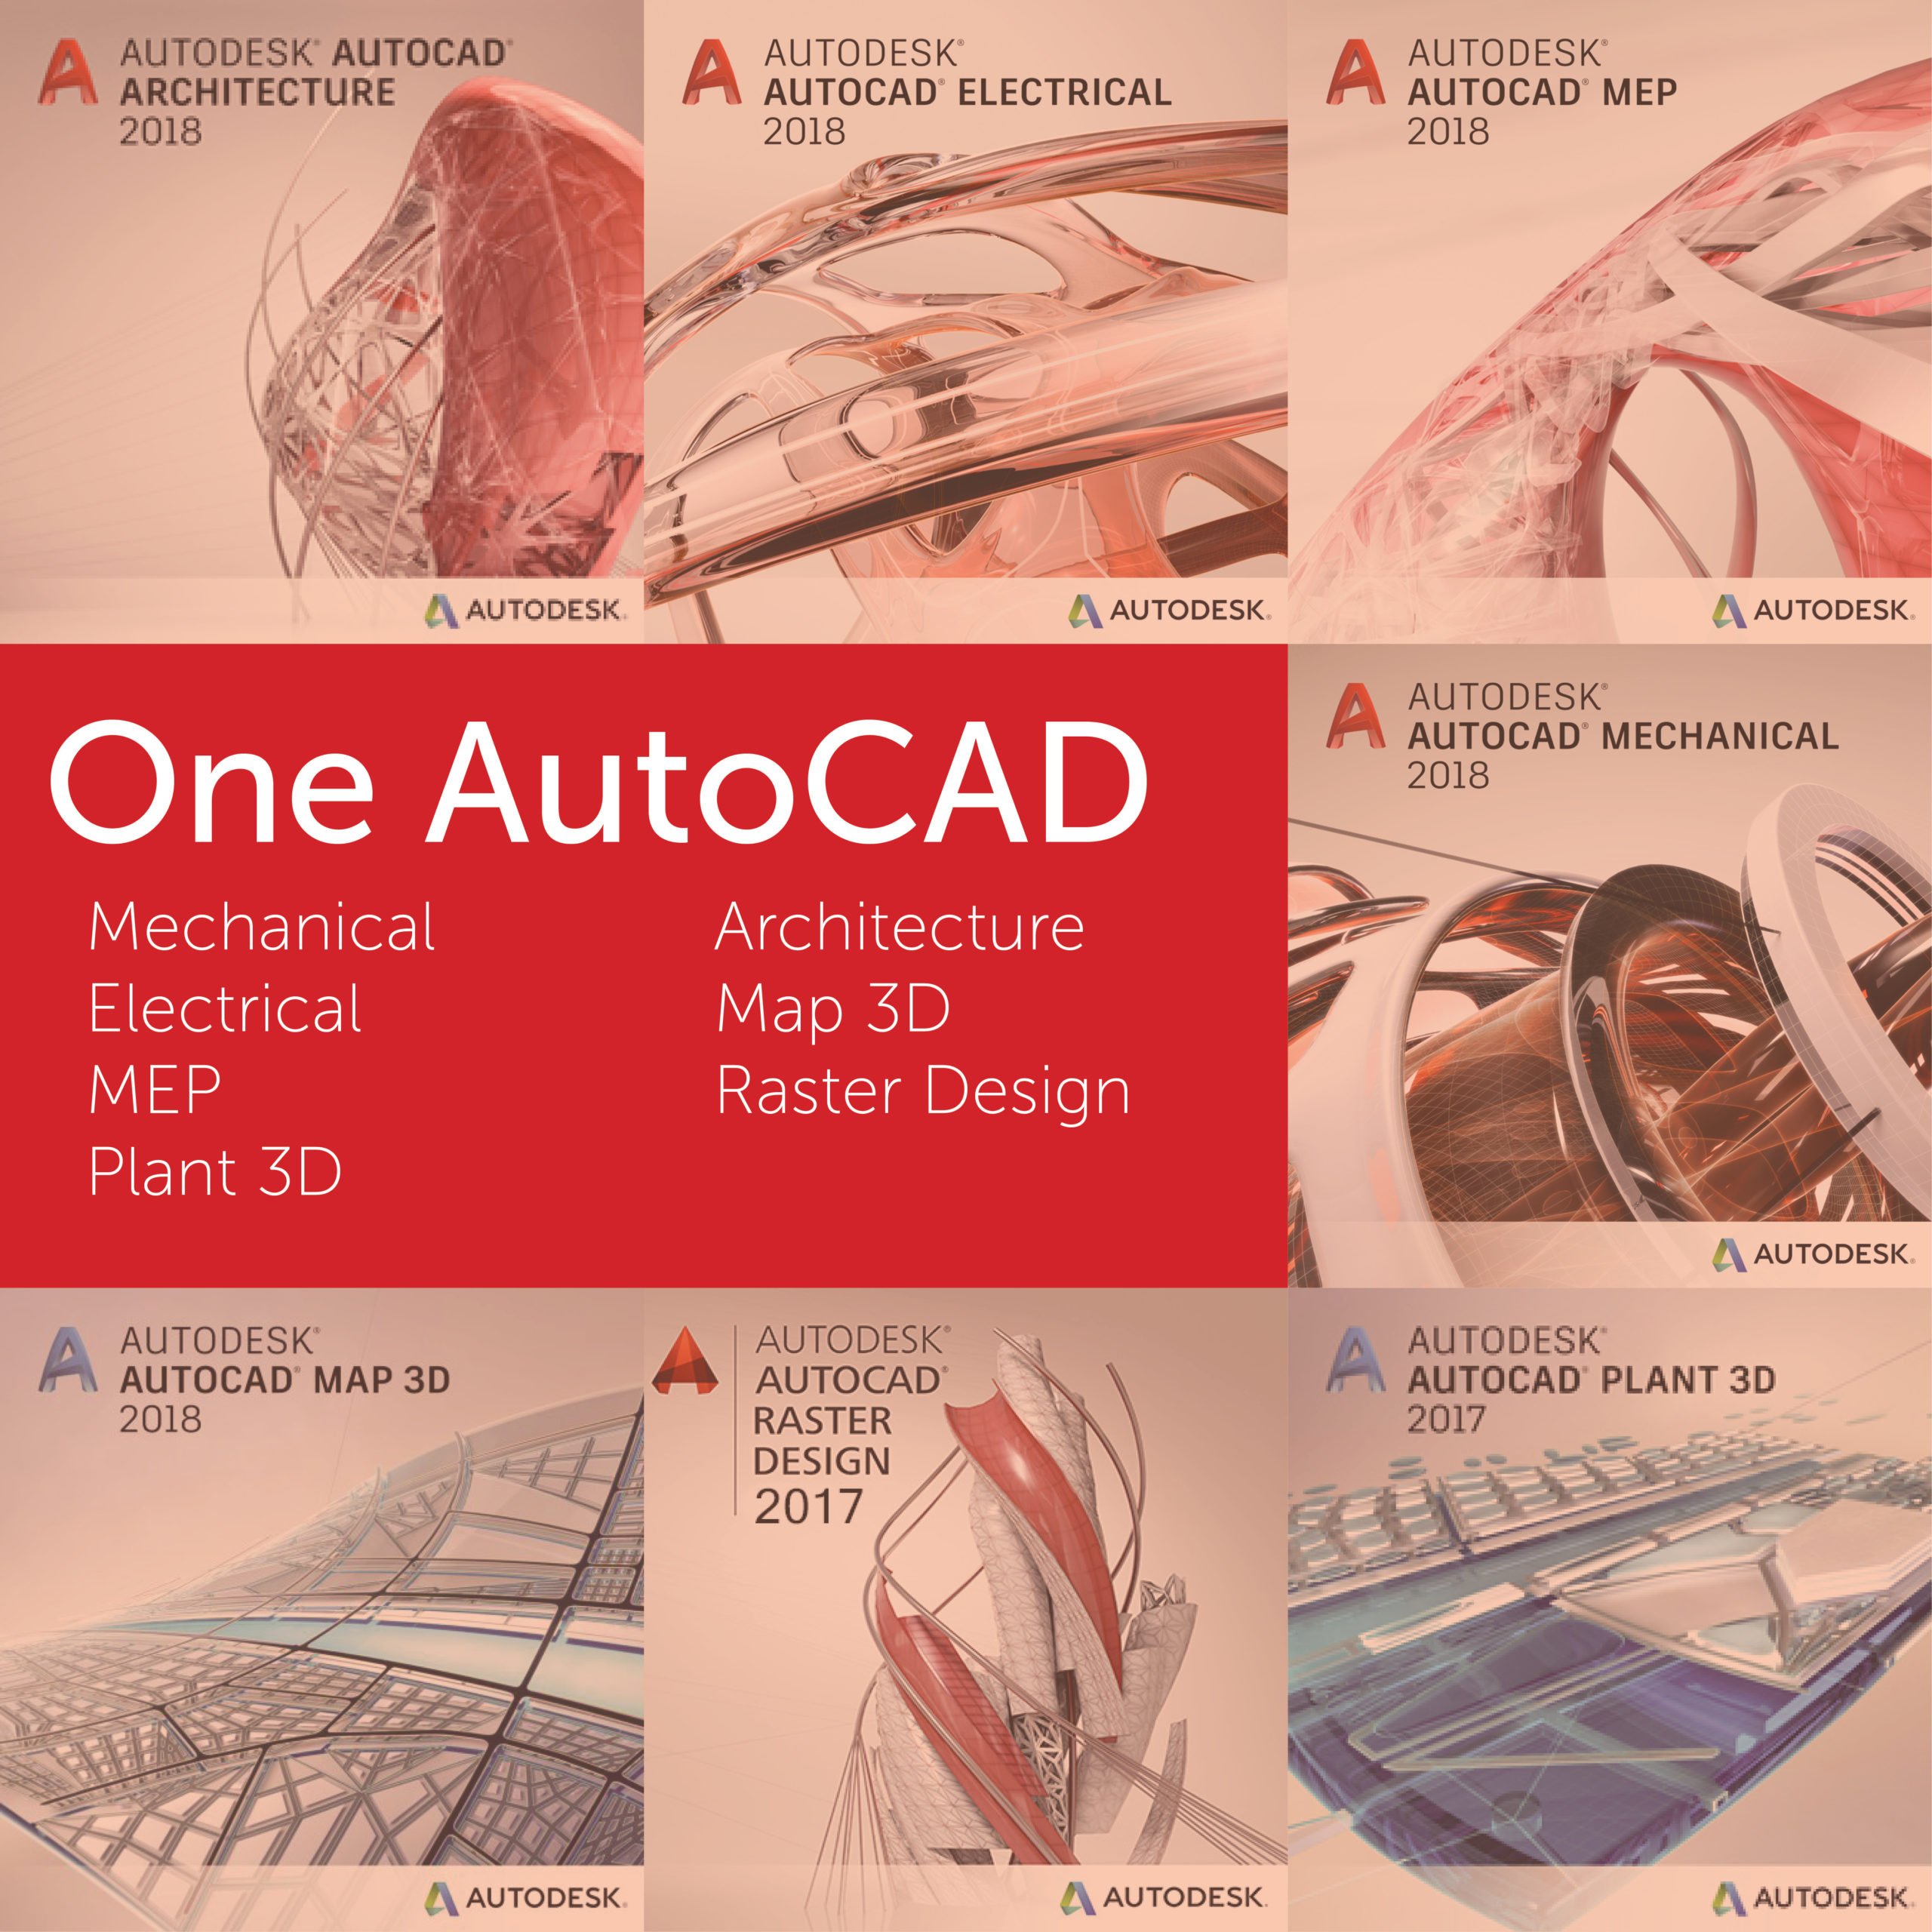 What’s New in AutoCAD 2019? – DWG Compare